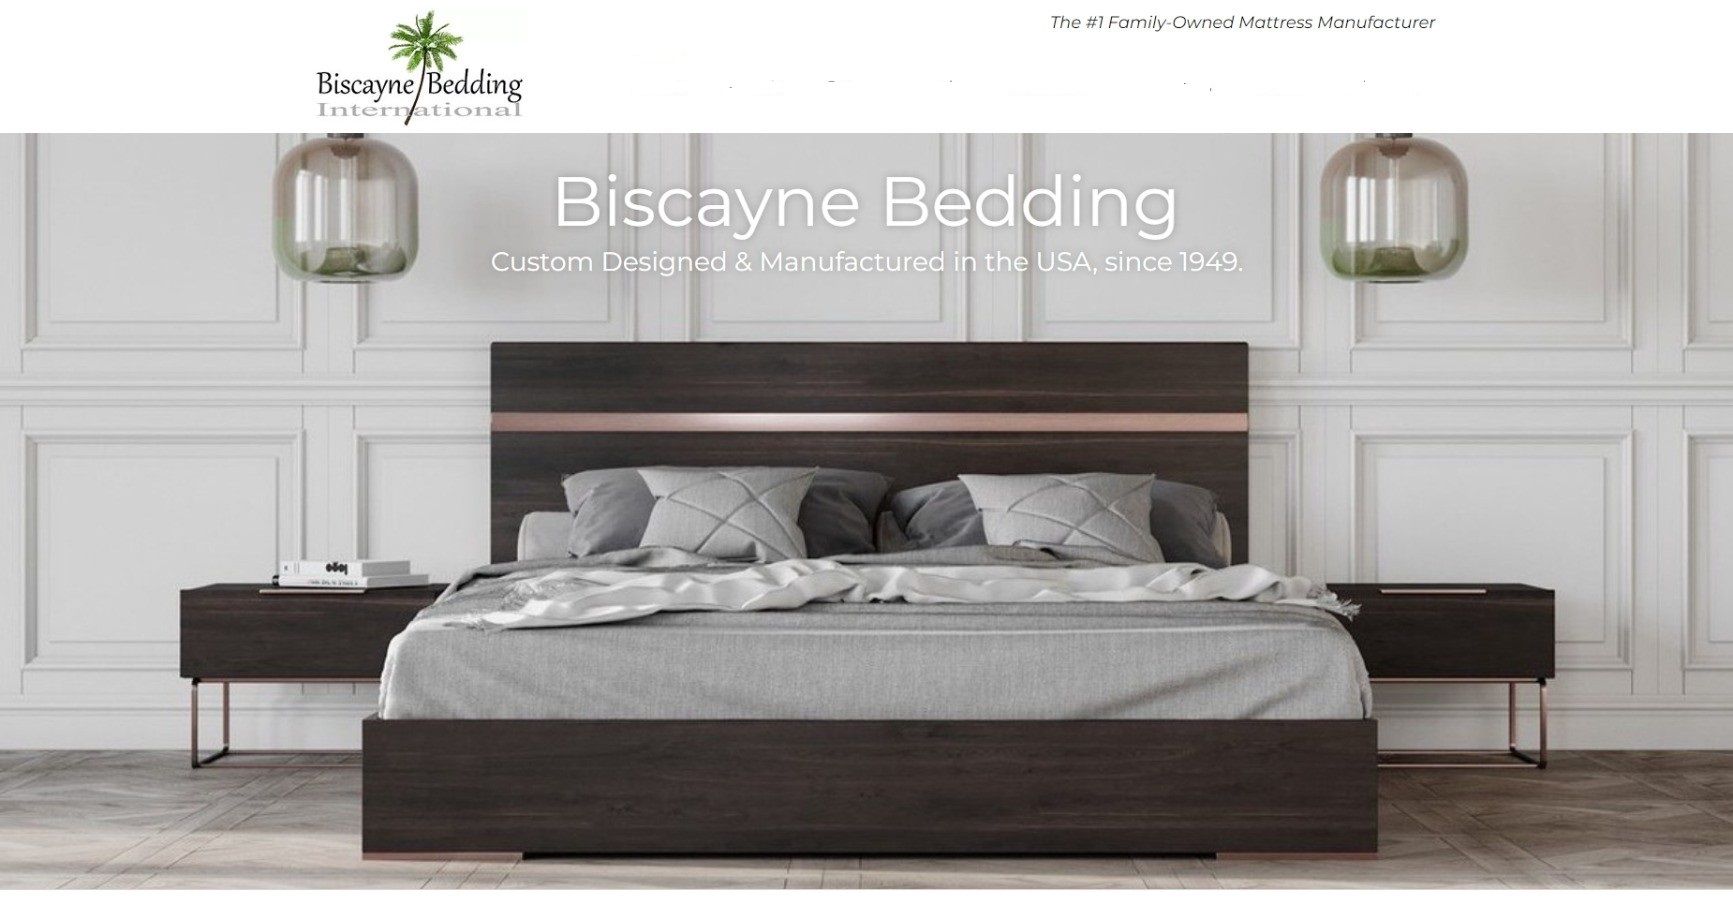 Biscayne Bedding for sale at Bratz-CFW Ft. Myers